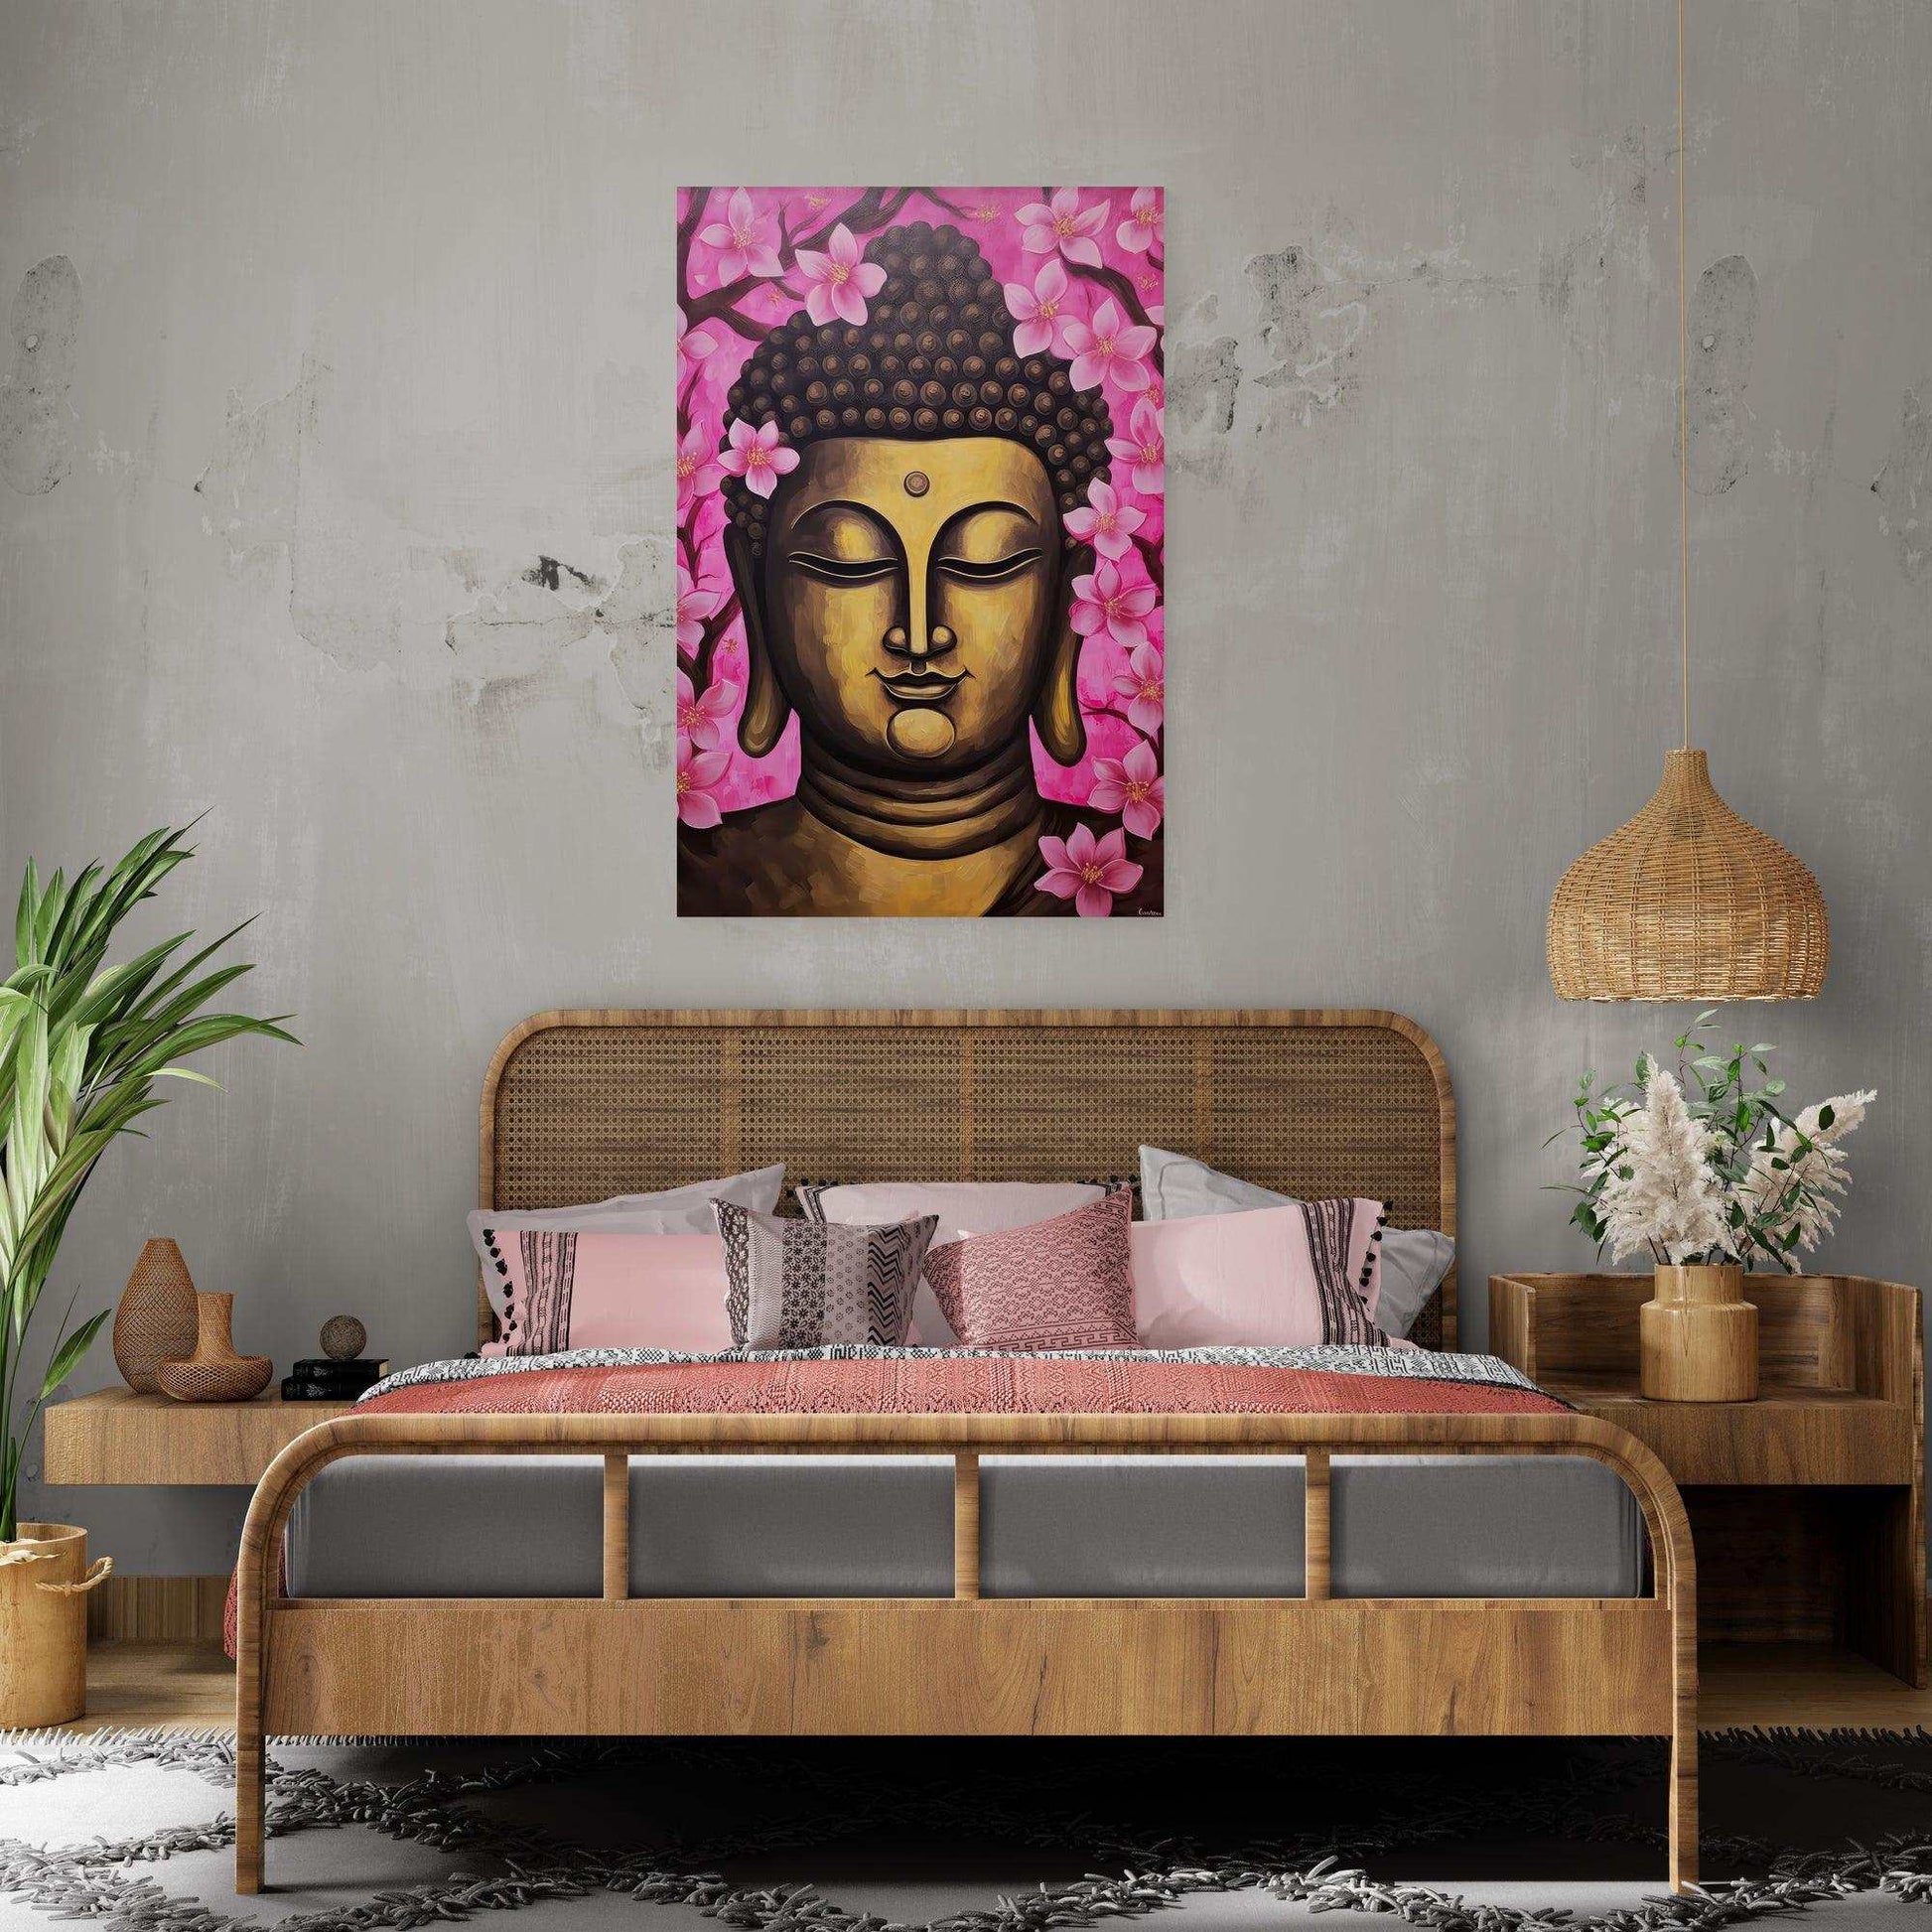 Buddha painting with deep pink cherry blossoms set against a rustic concrete wall above a wicker bed adorned with soft pink and patterned pillows, complemented by a woven hanging lamp and lush green plants.